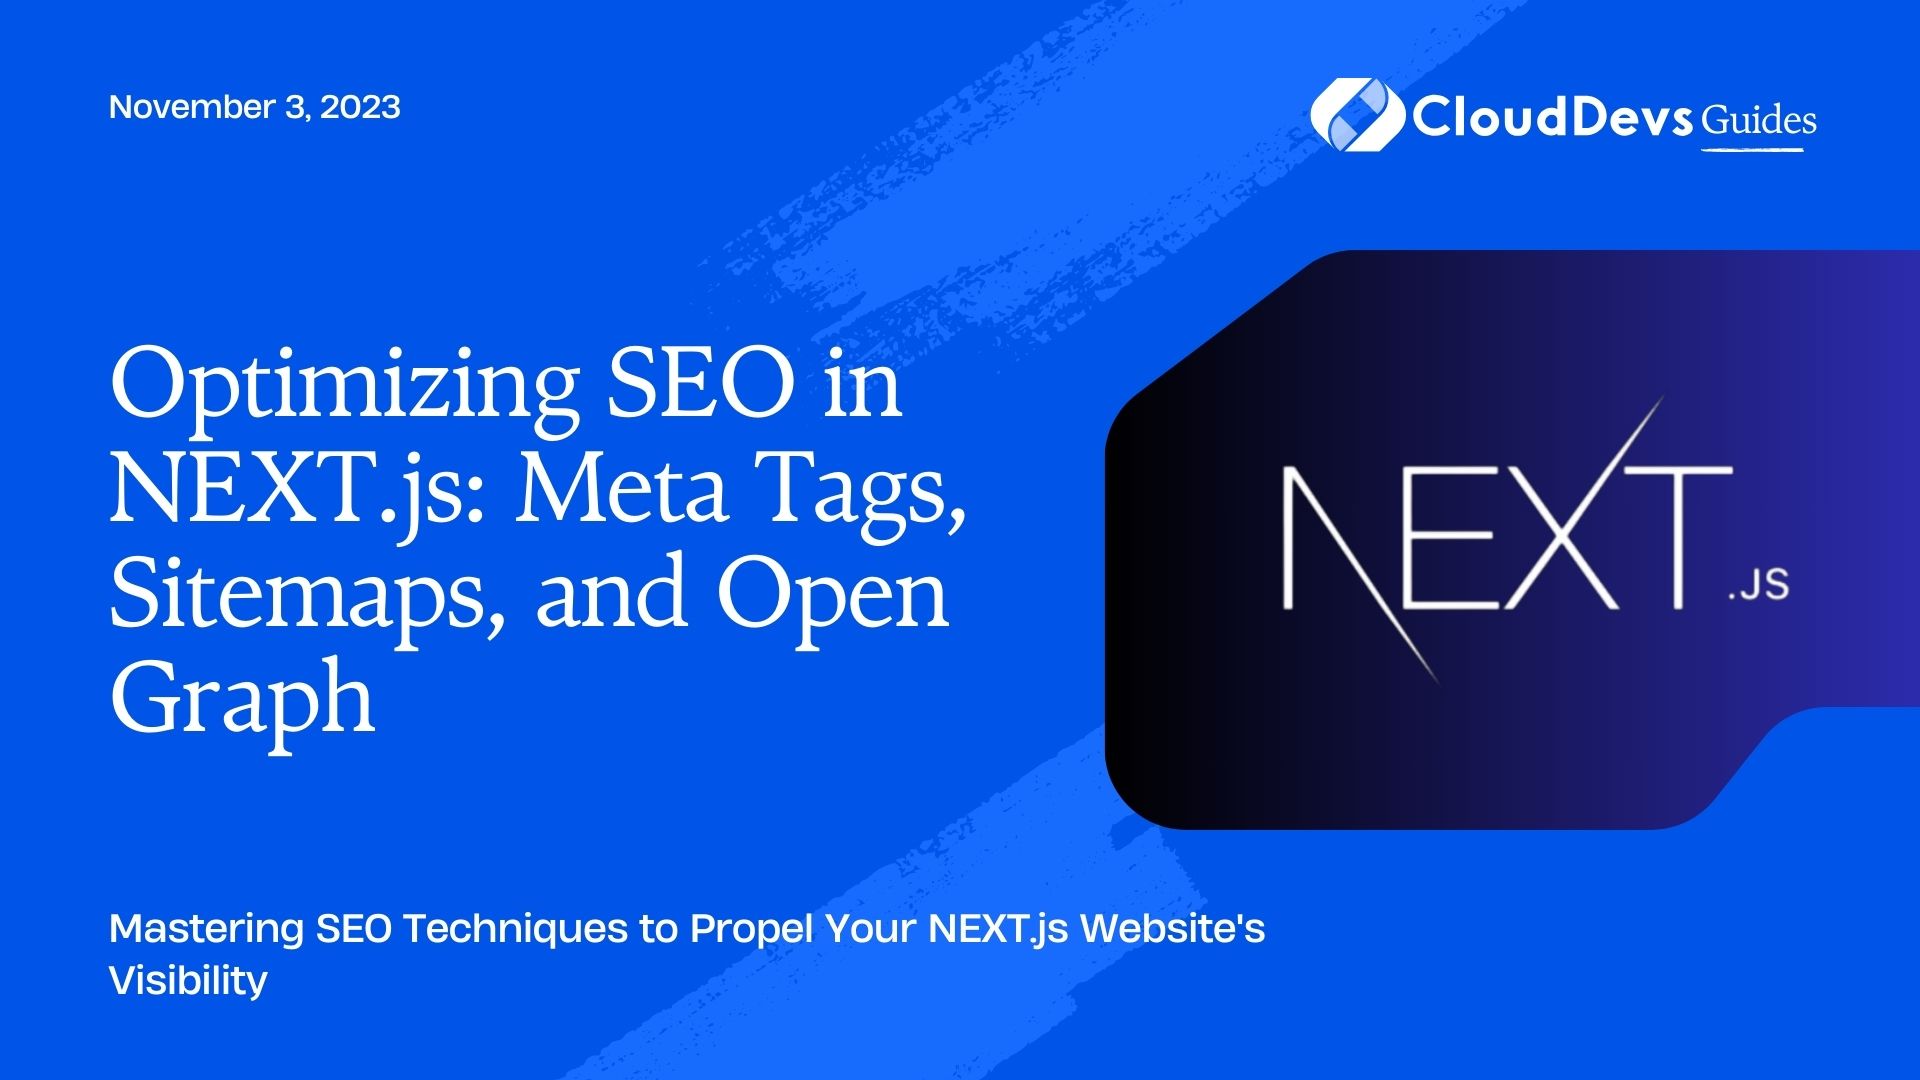 Optimizing SEO in NEXT.js: Meta Tags, Sitemaps, and Open Graph